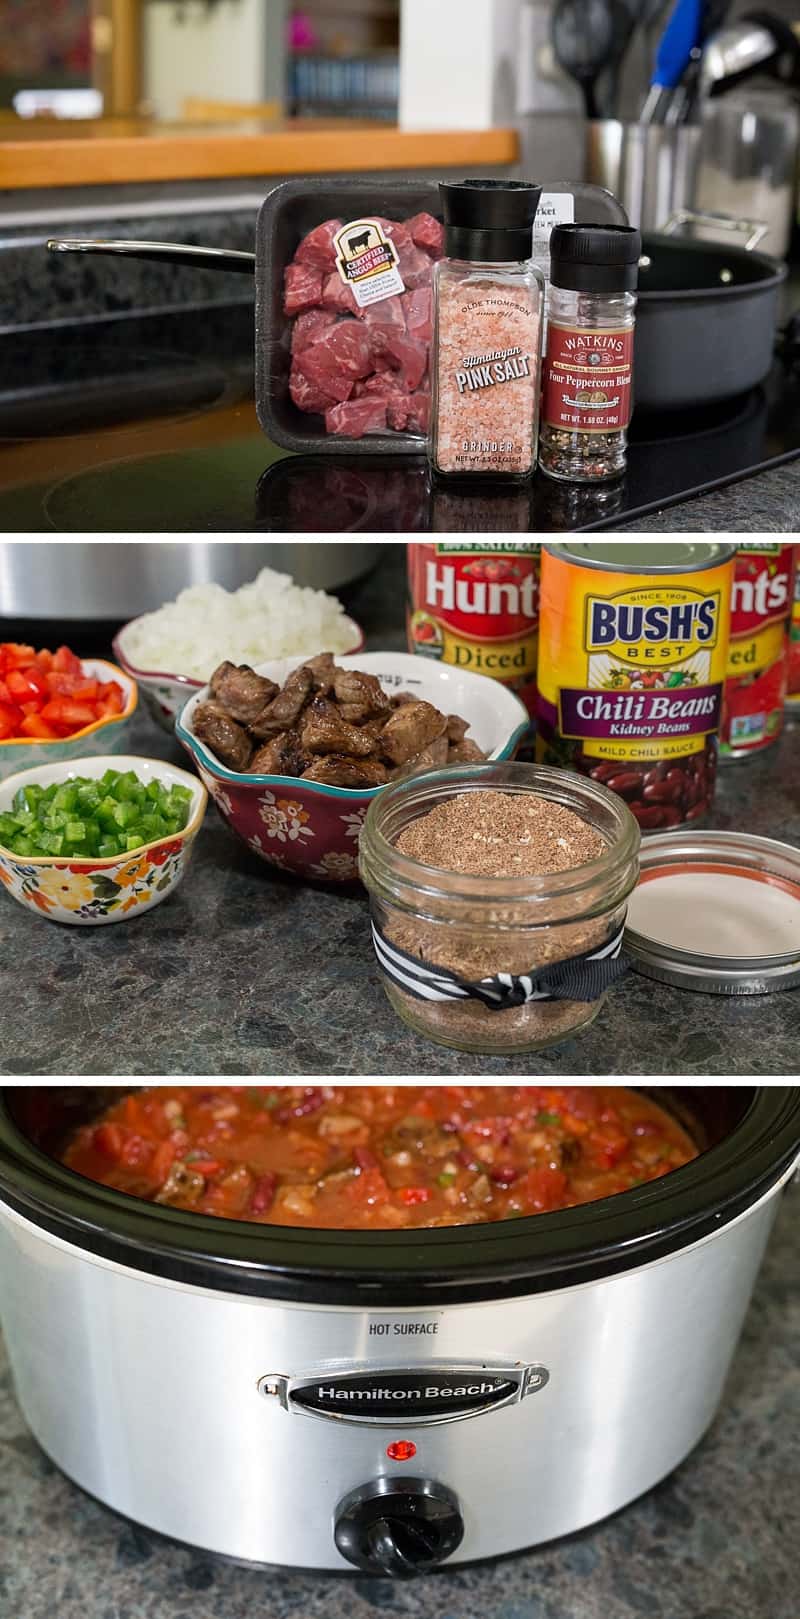 Best steak chili EVER! This slow cooker recipe is so SIMPLE to make. It is perfect for a quiet evening at home or for hosting a family party. Plus you can freeze leftovers for an easy weeknight dinner on a school night. *This is one of my go-to dinners that the whole family loves. Perfect comfort food.